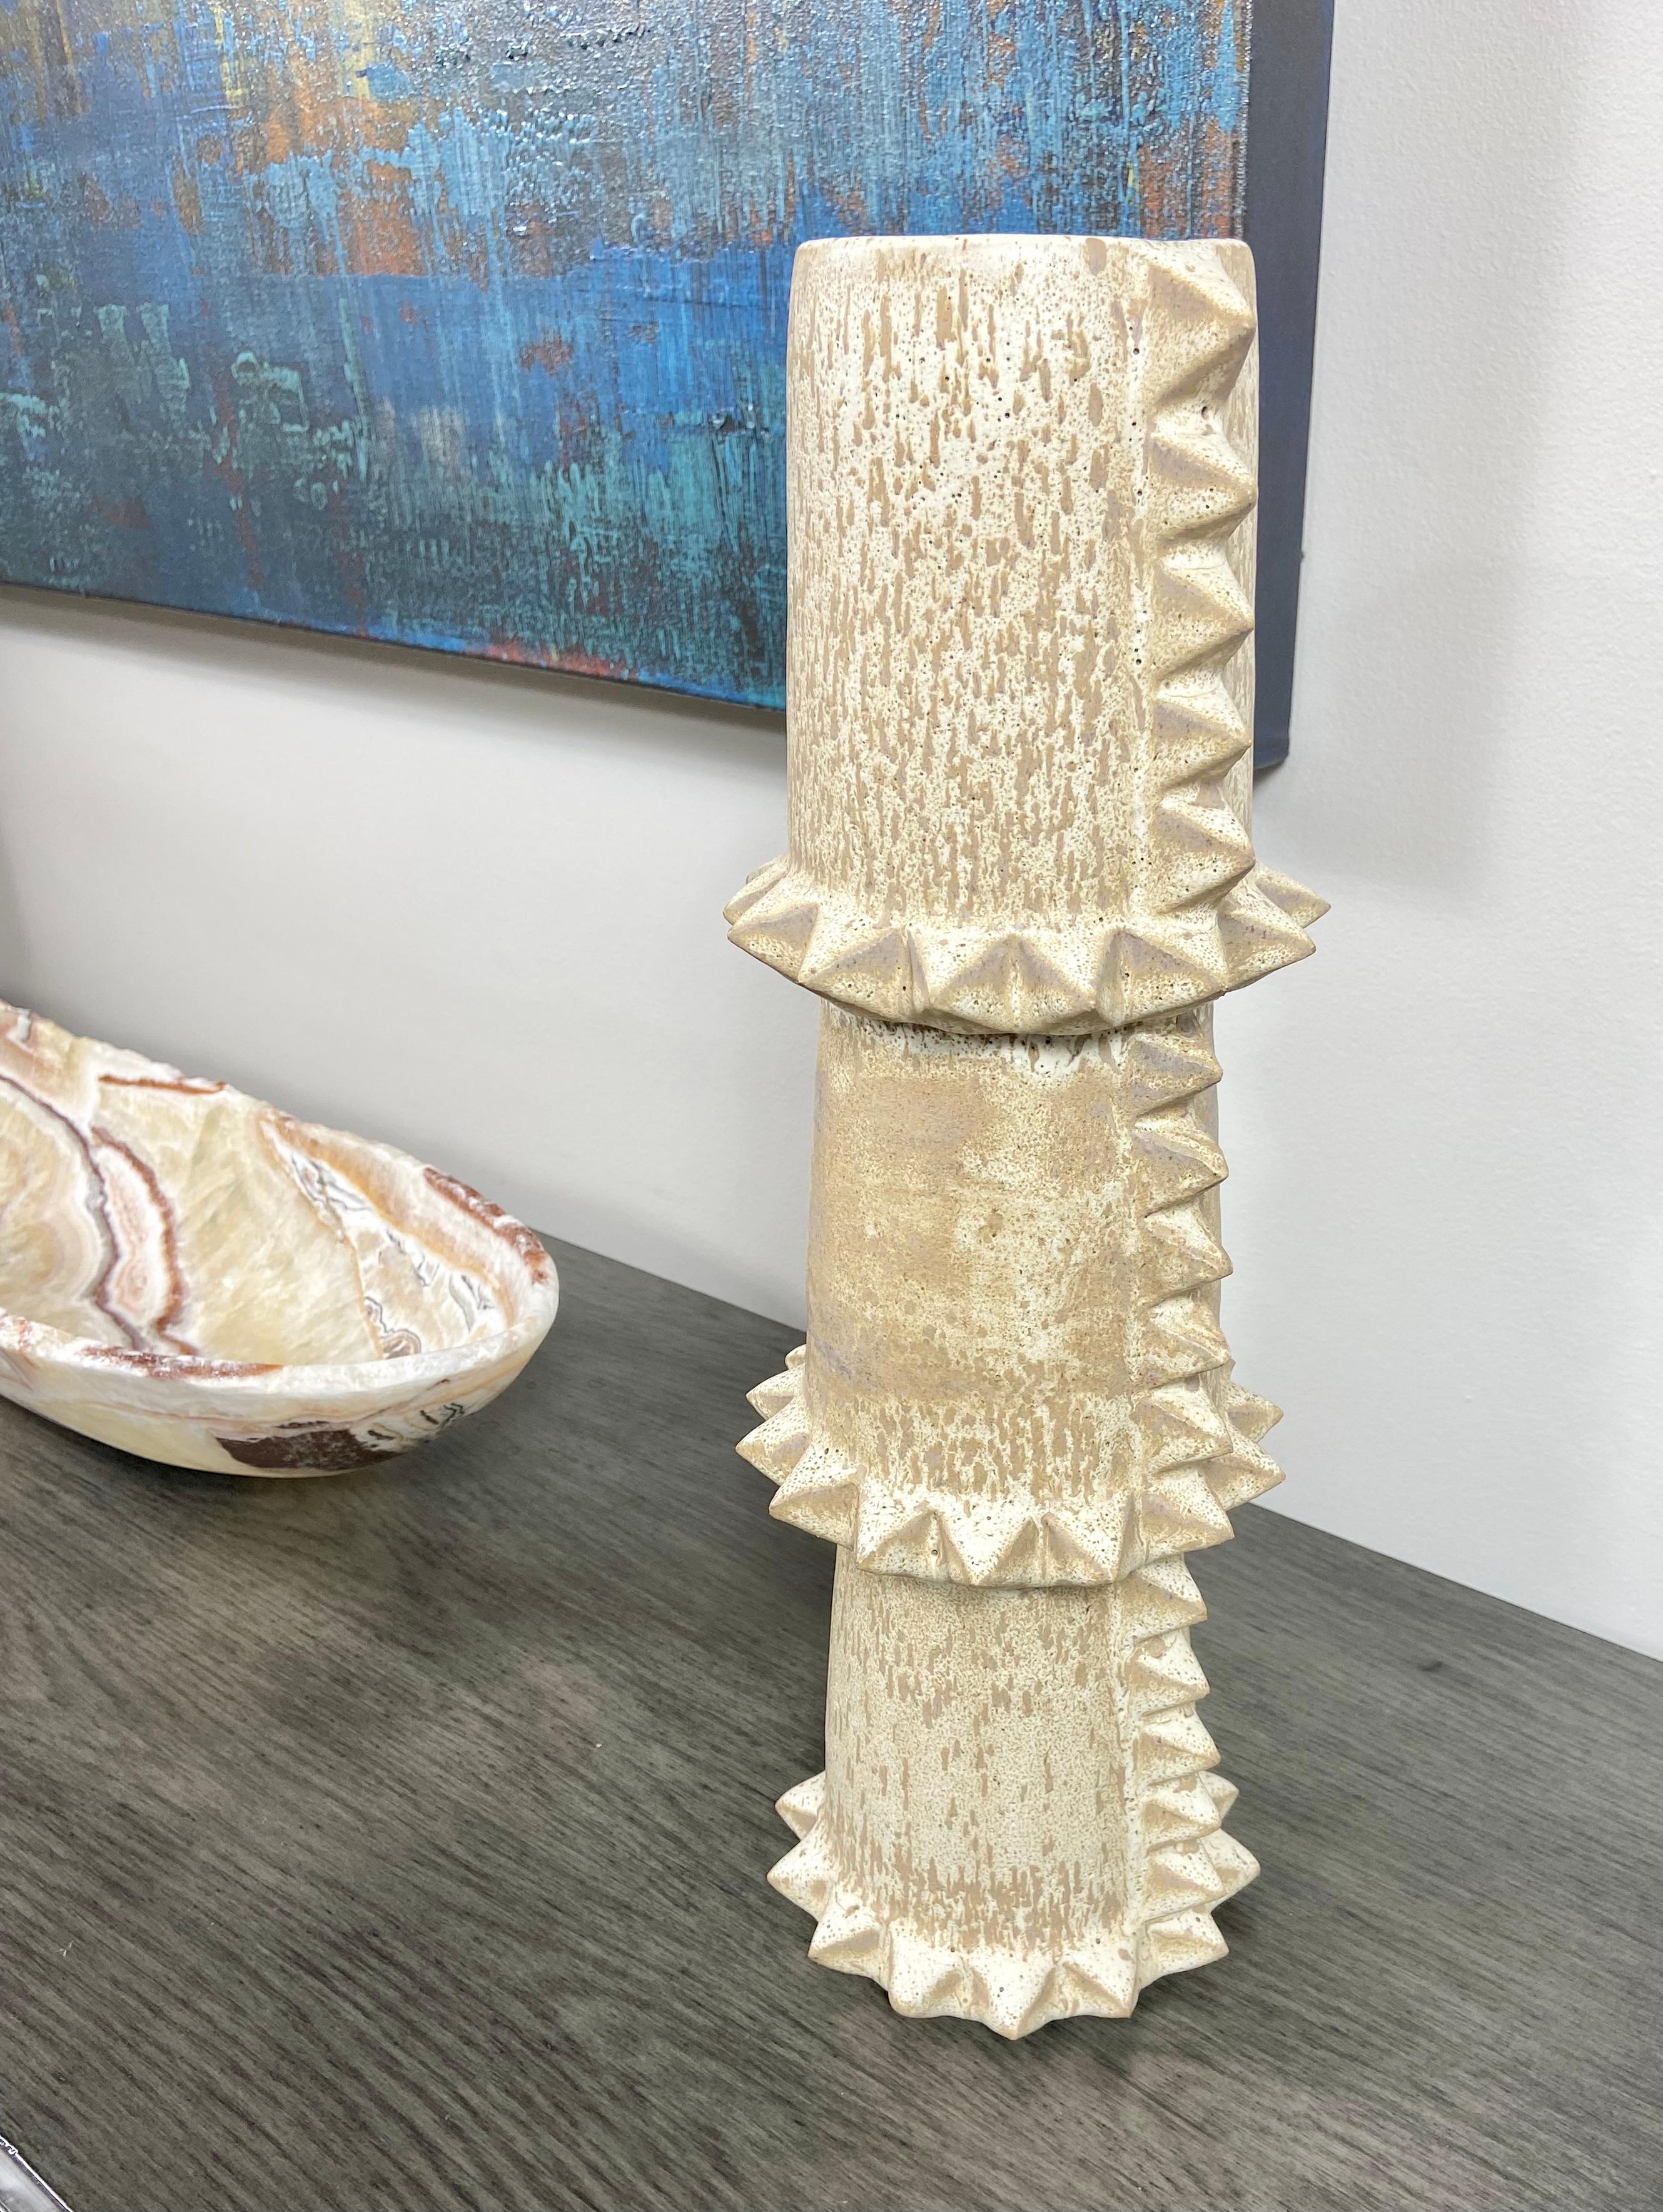 A tall ceramic stacked totem-like vase by Los Angeles based LGS Studio. This one of a kind hand-made piece features a mottled glaze from off white to light mocha. It is meticulously hand carved with ceramic spikes. This vessel stands alone